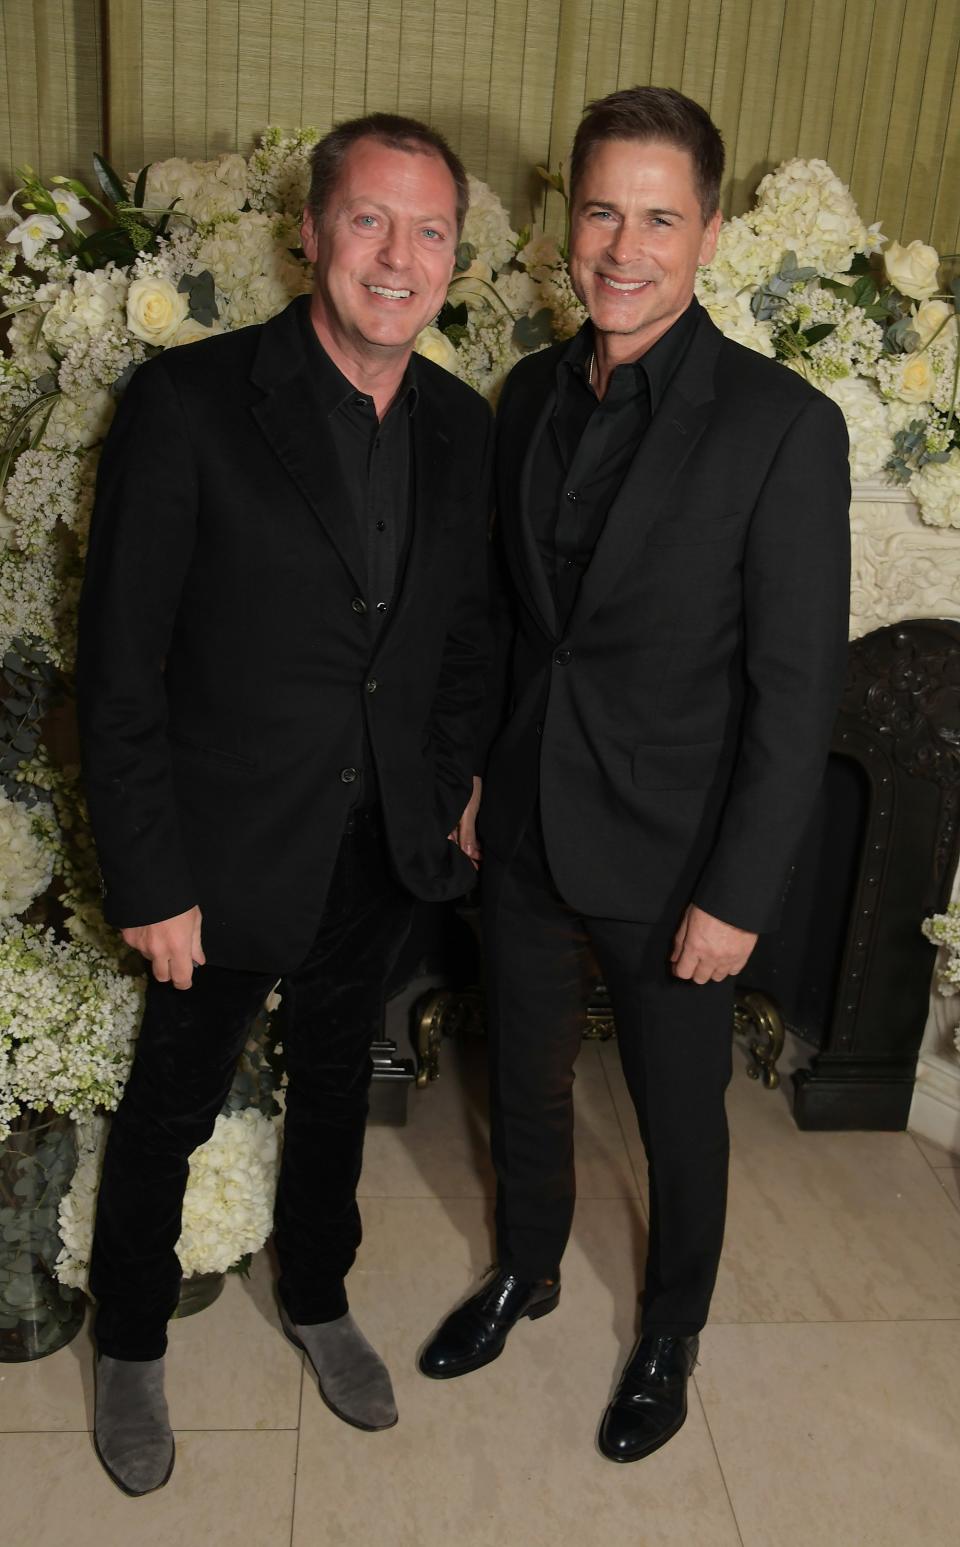 Matthew Freud and Rob Lowe attend the British Vogue and Tiffany & Co. Celebrate Fashion and Film Party at Annabel’s